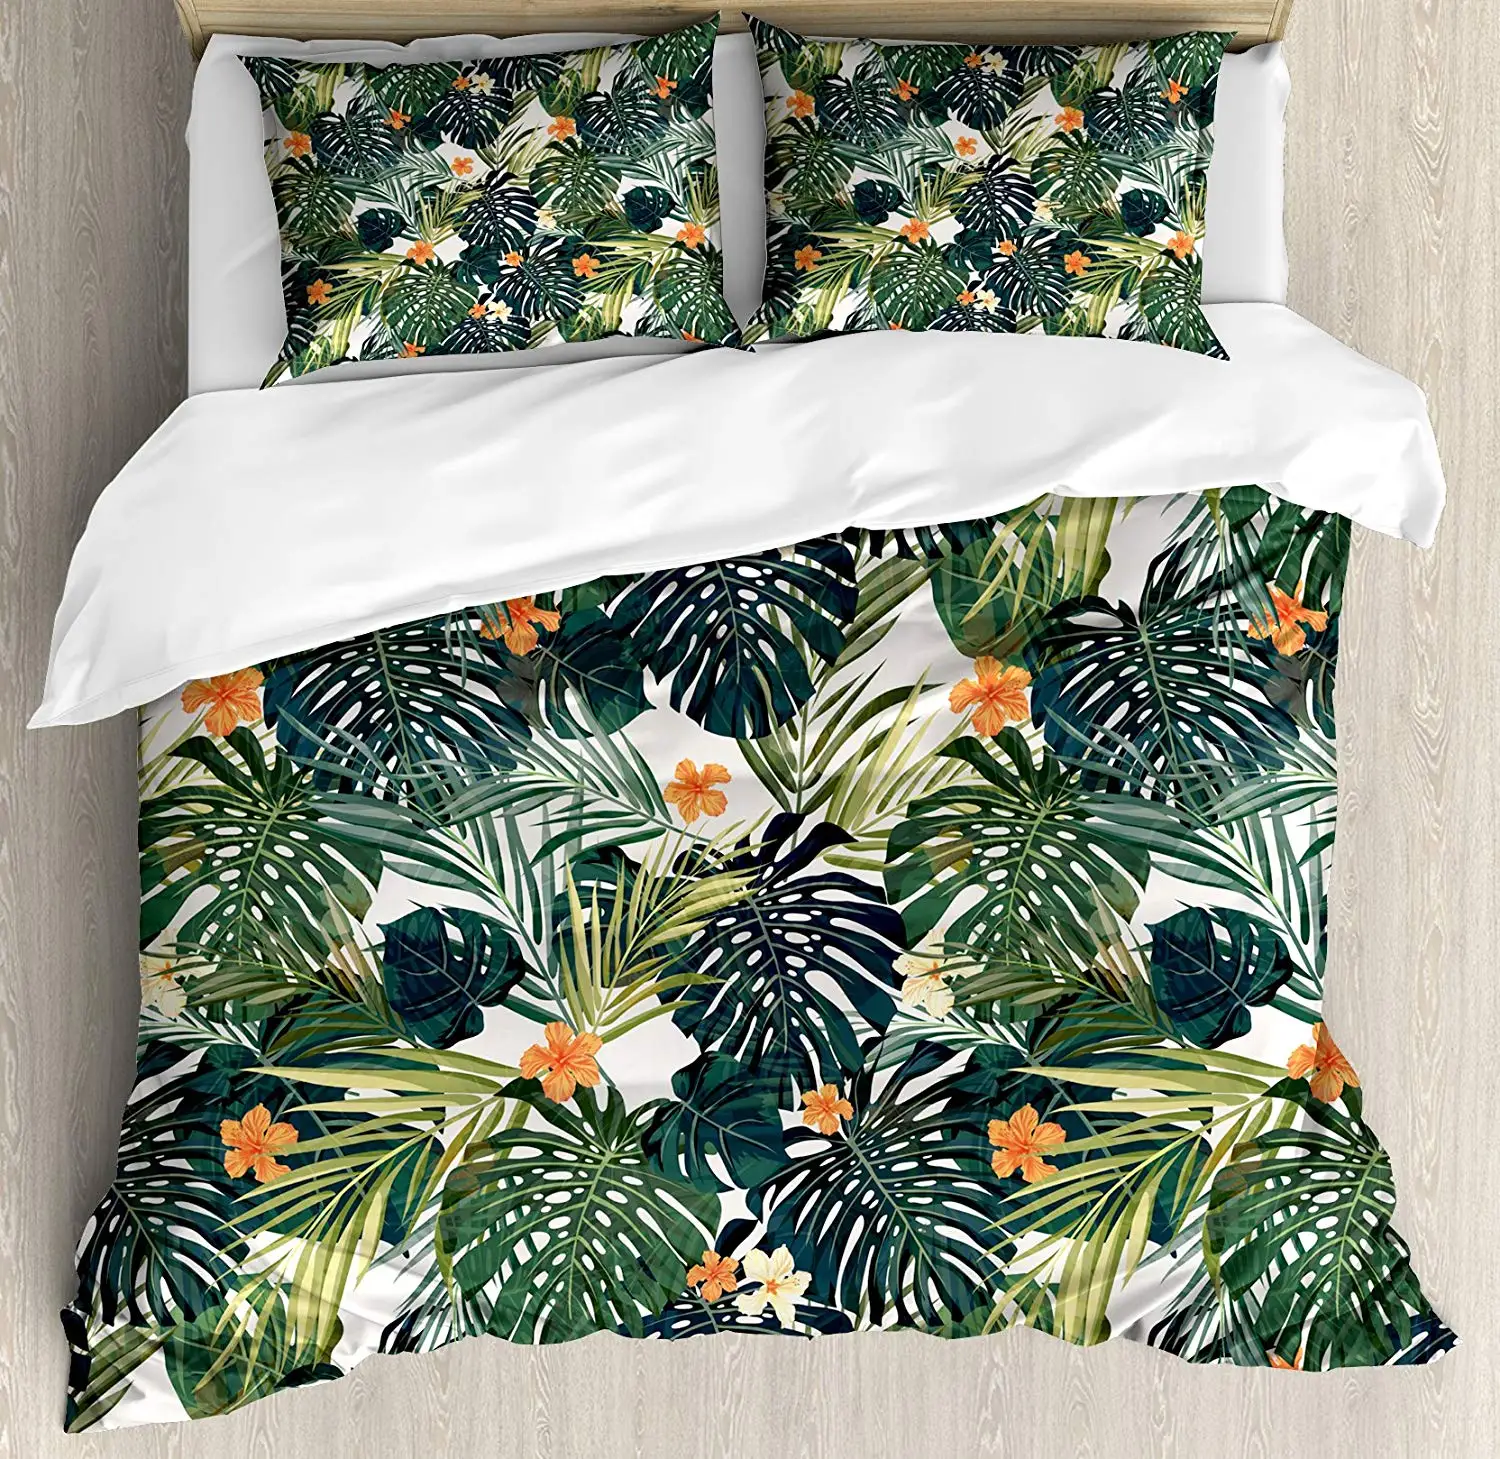 Hawaii Duvet Cover Set Colorful Palm Trees Tropical Plants With